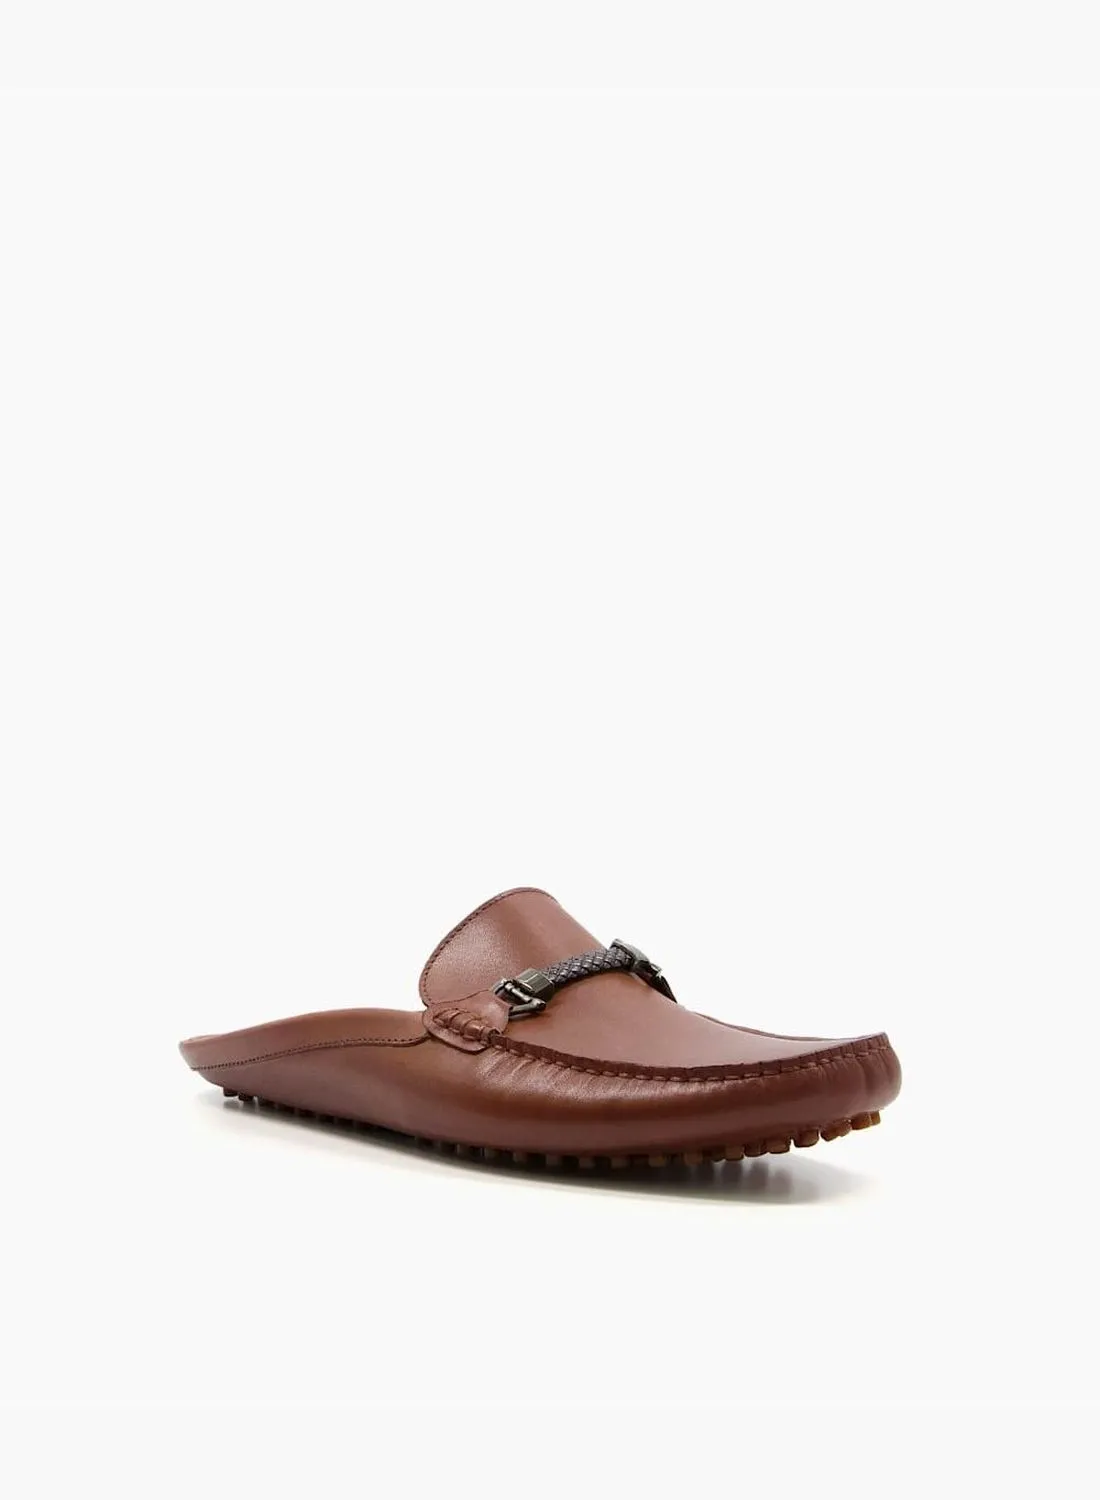 Dune LONDON Beaker Square Toe Leather Backless Loafers